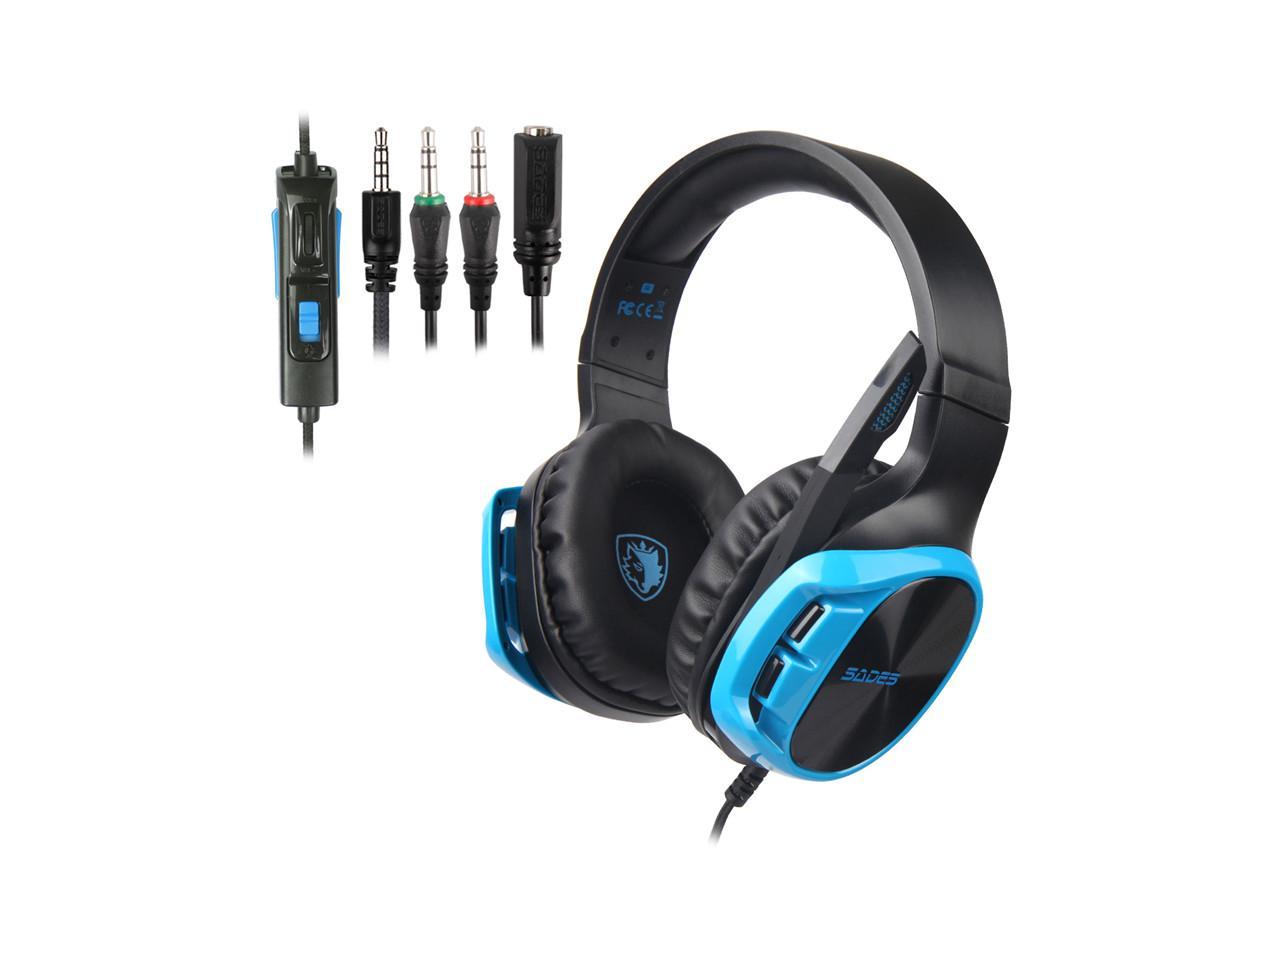 SADES R17 Gaming Headset Over Ear Noise-canceling Gaming Headphones with Mic For PS4 Controller Xbox One PC Laptop Tablet Smartphone